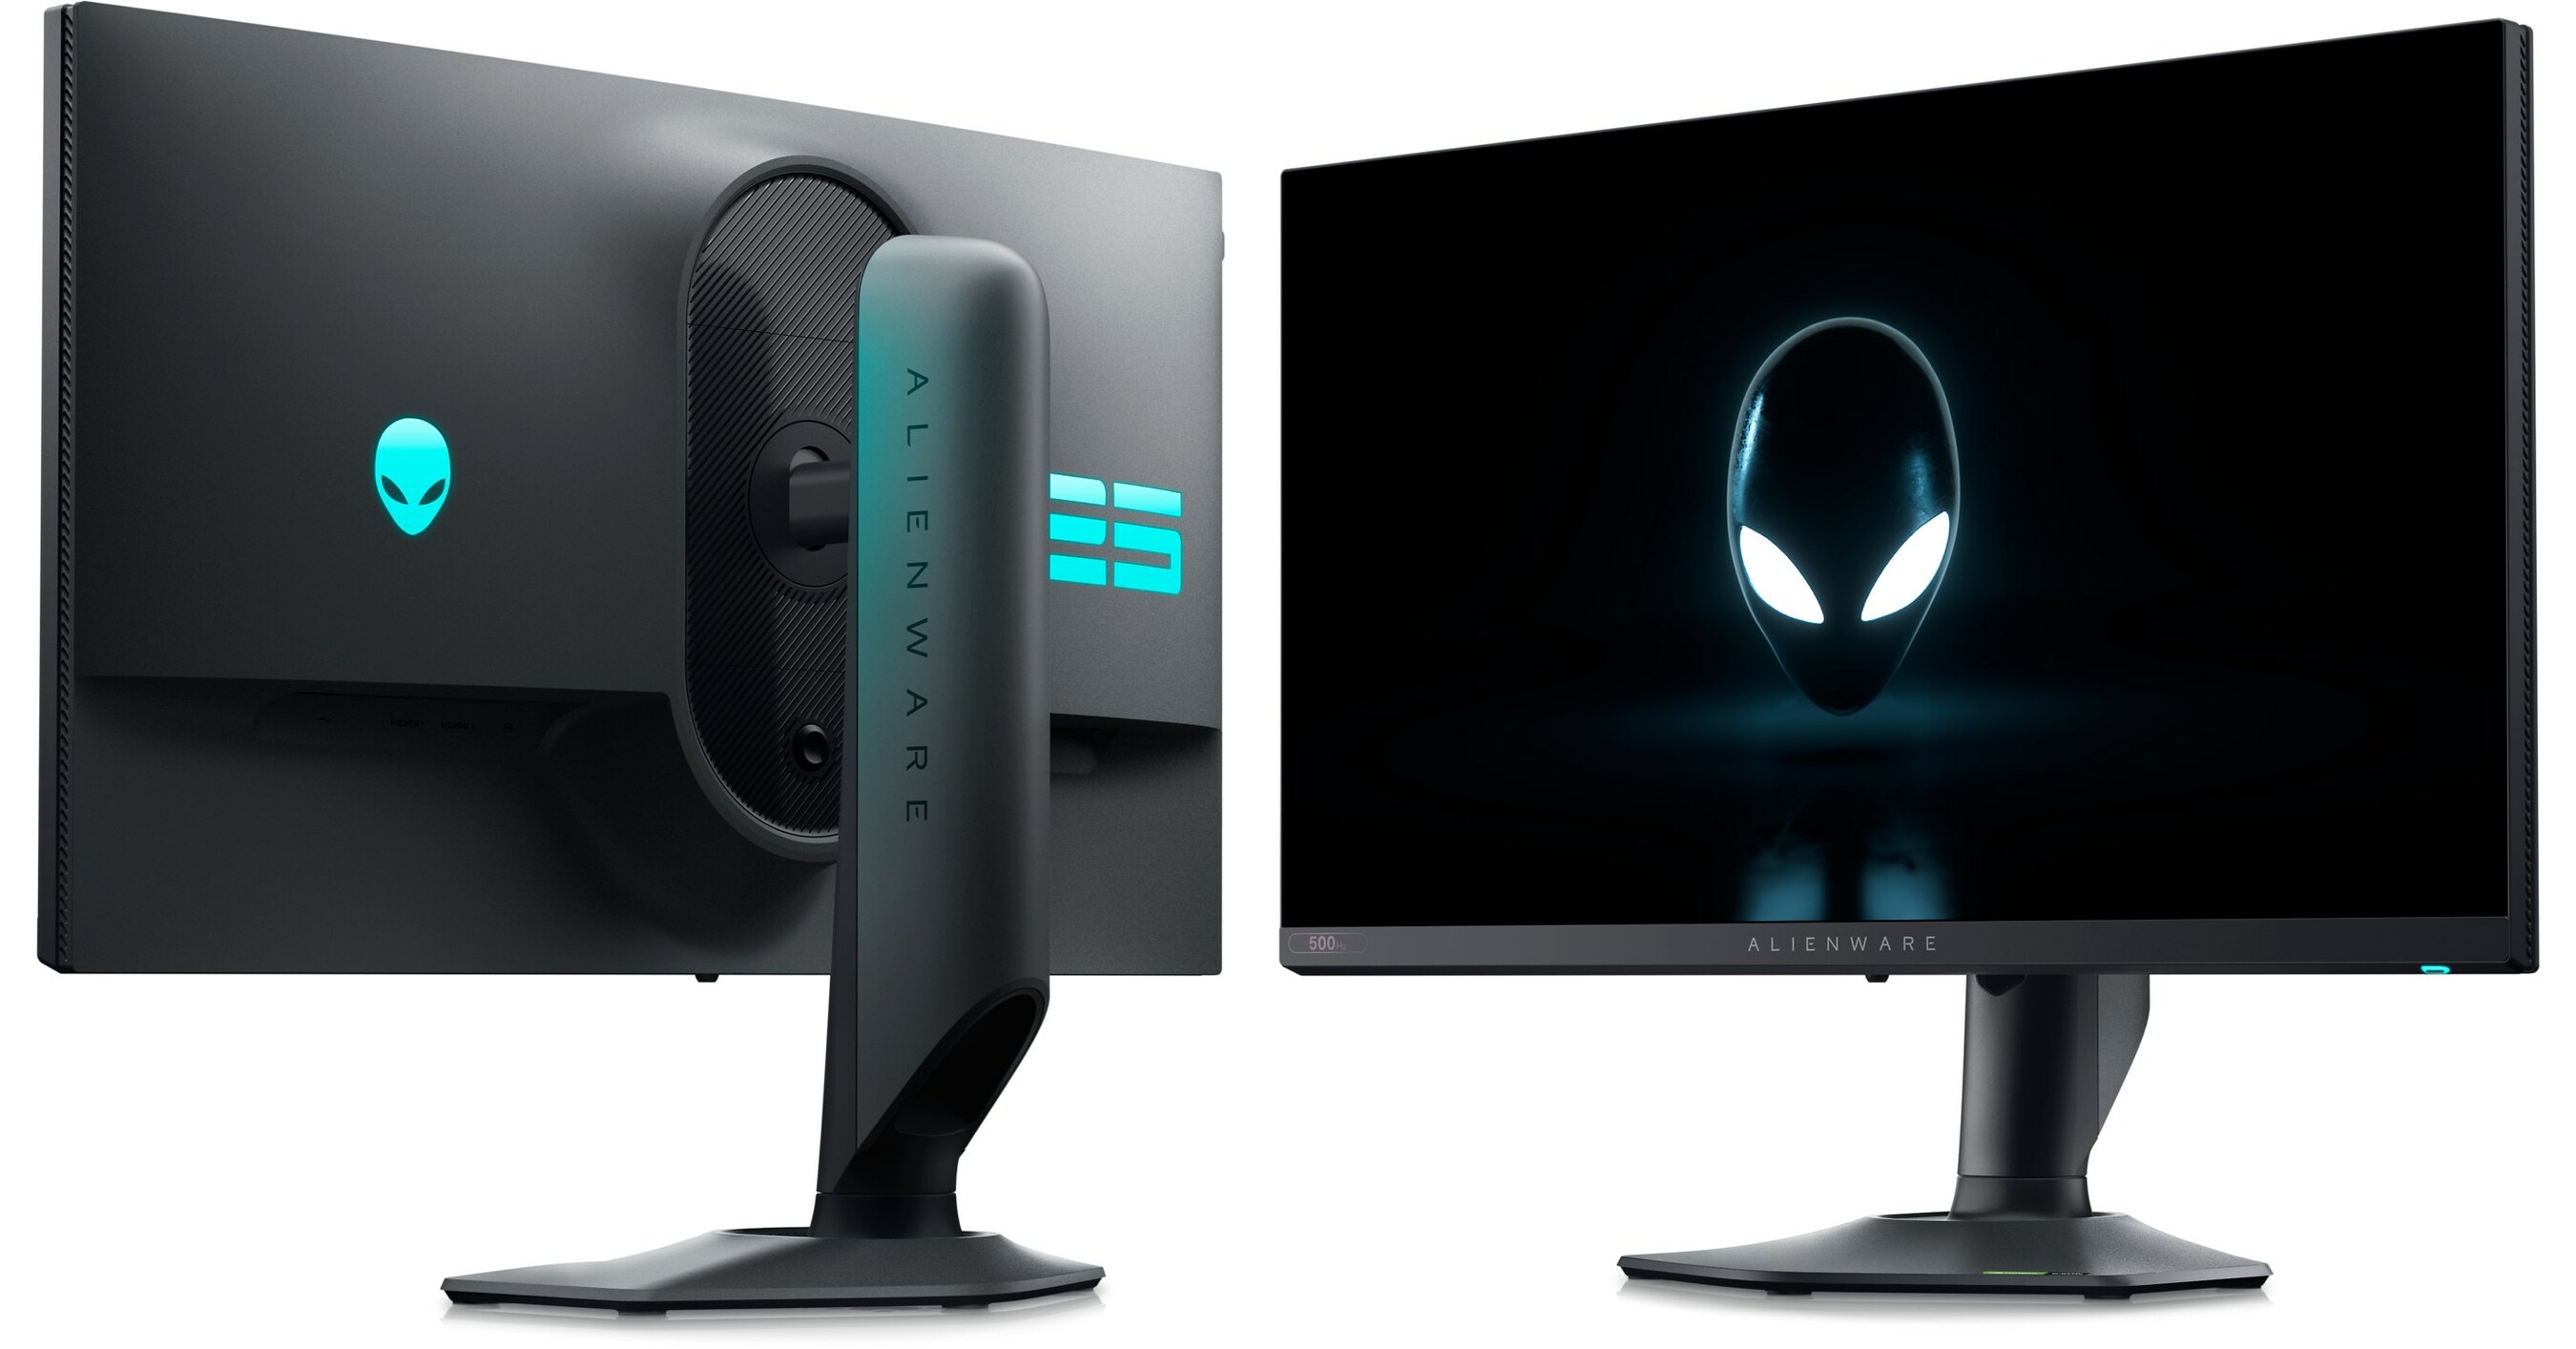 WORLD'S FASTEST Gaming Monitor – 500Hz Powered by NVIDIA G-SYNC 